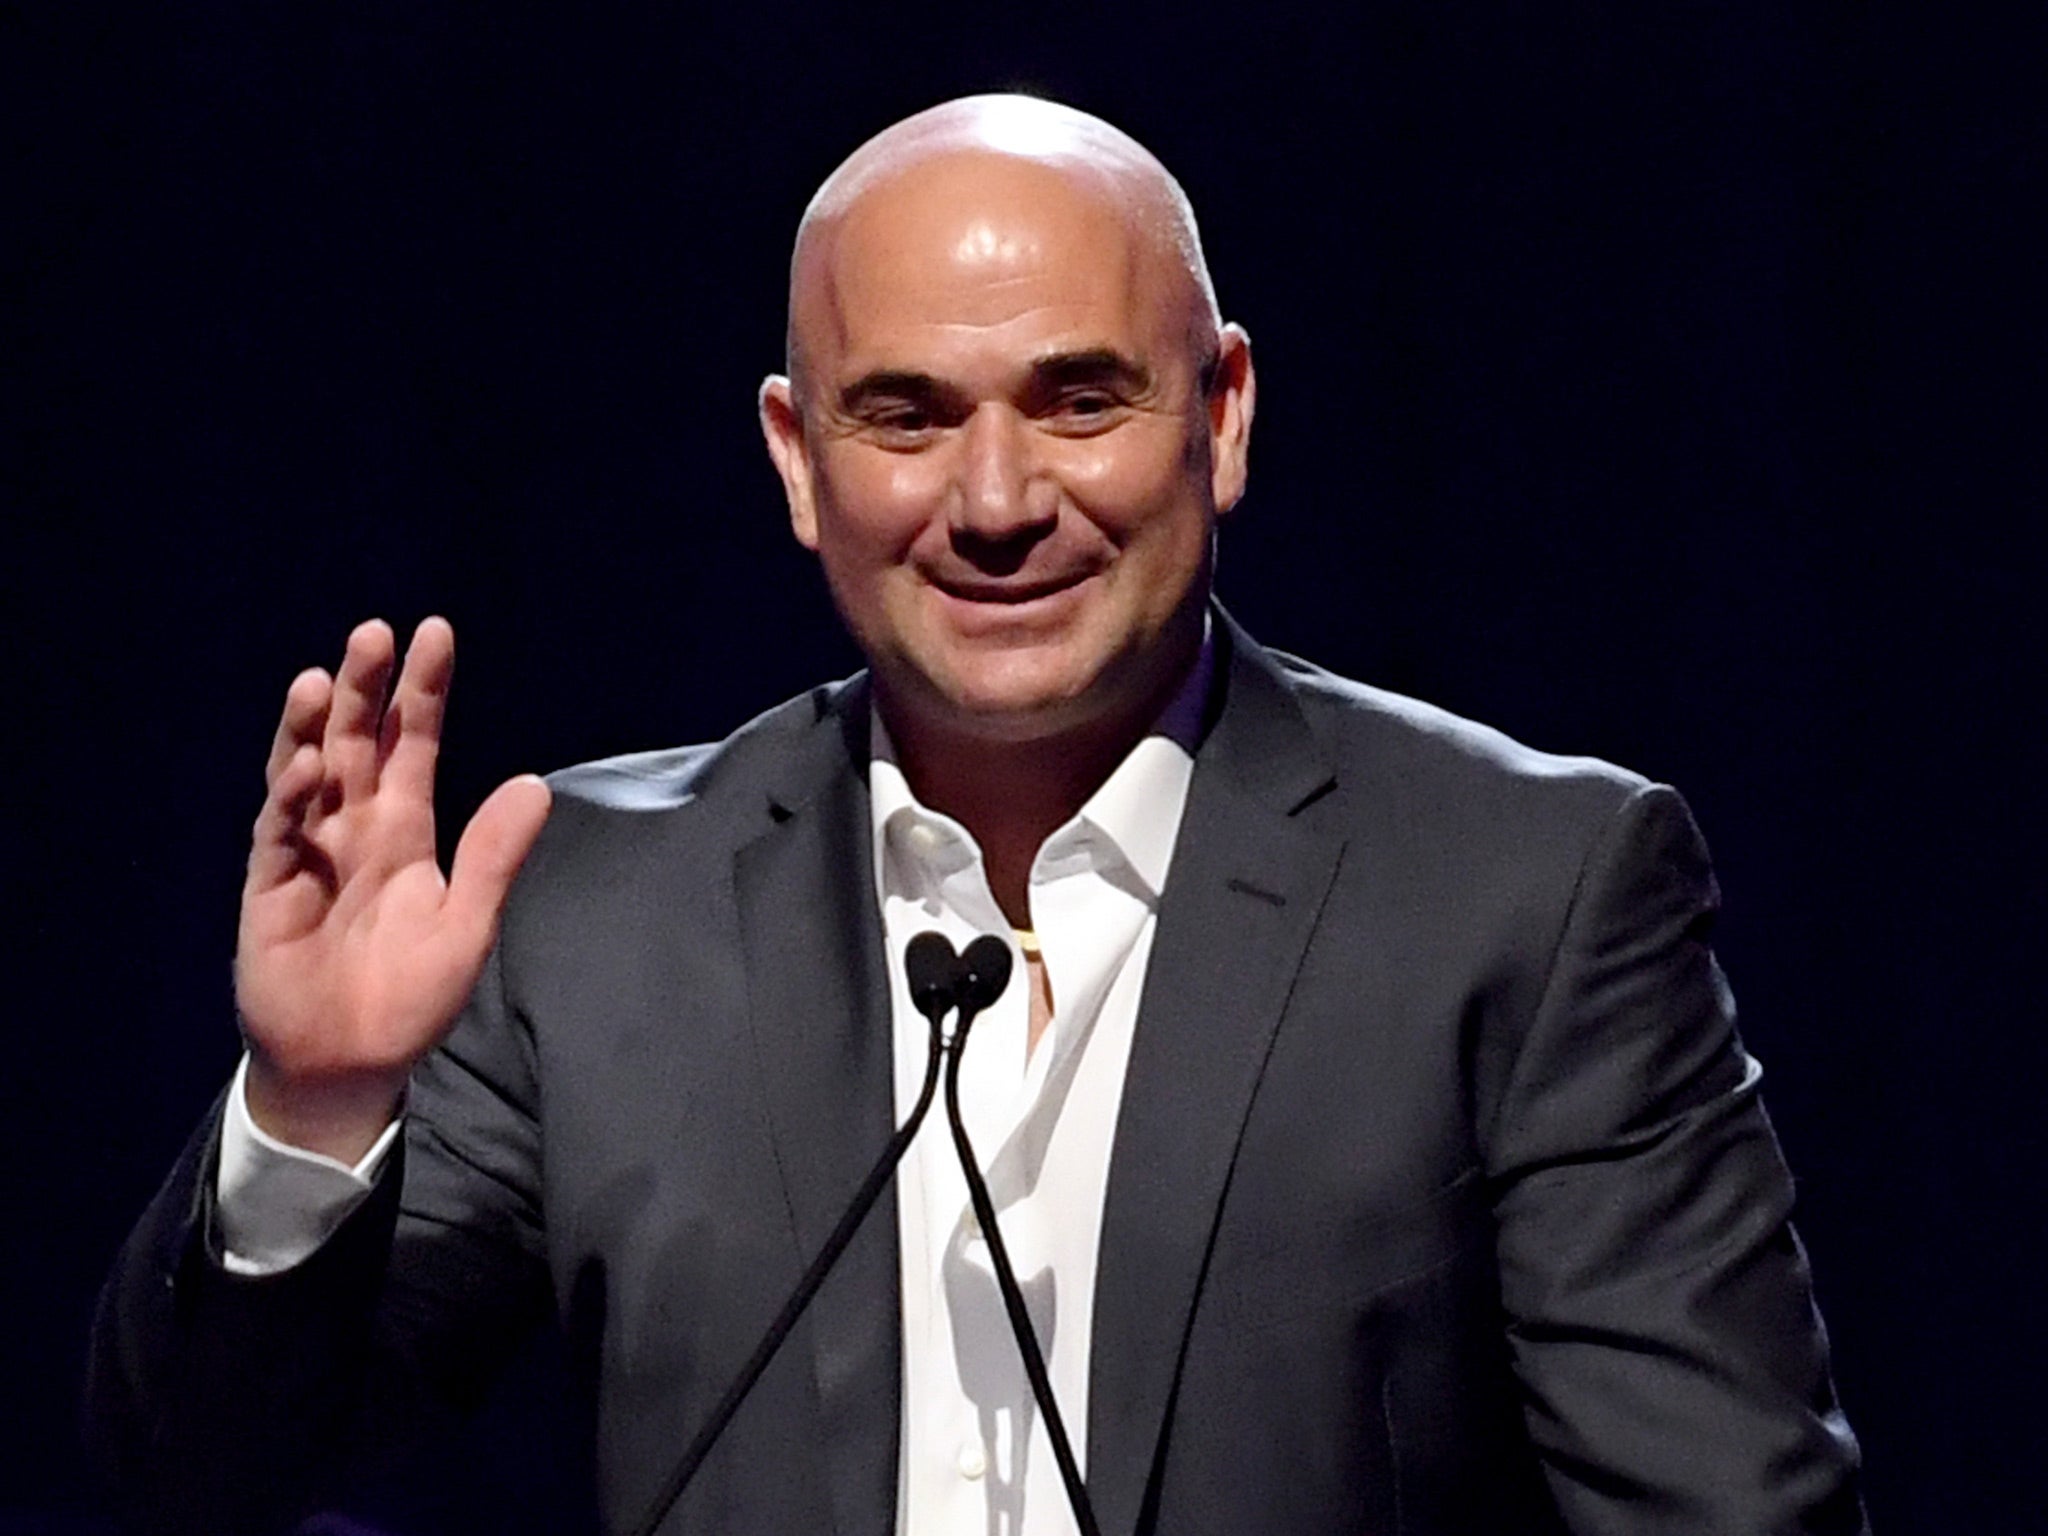 Andre Agassi will work with Novak Djokovic for the first time over the next fortnight